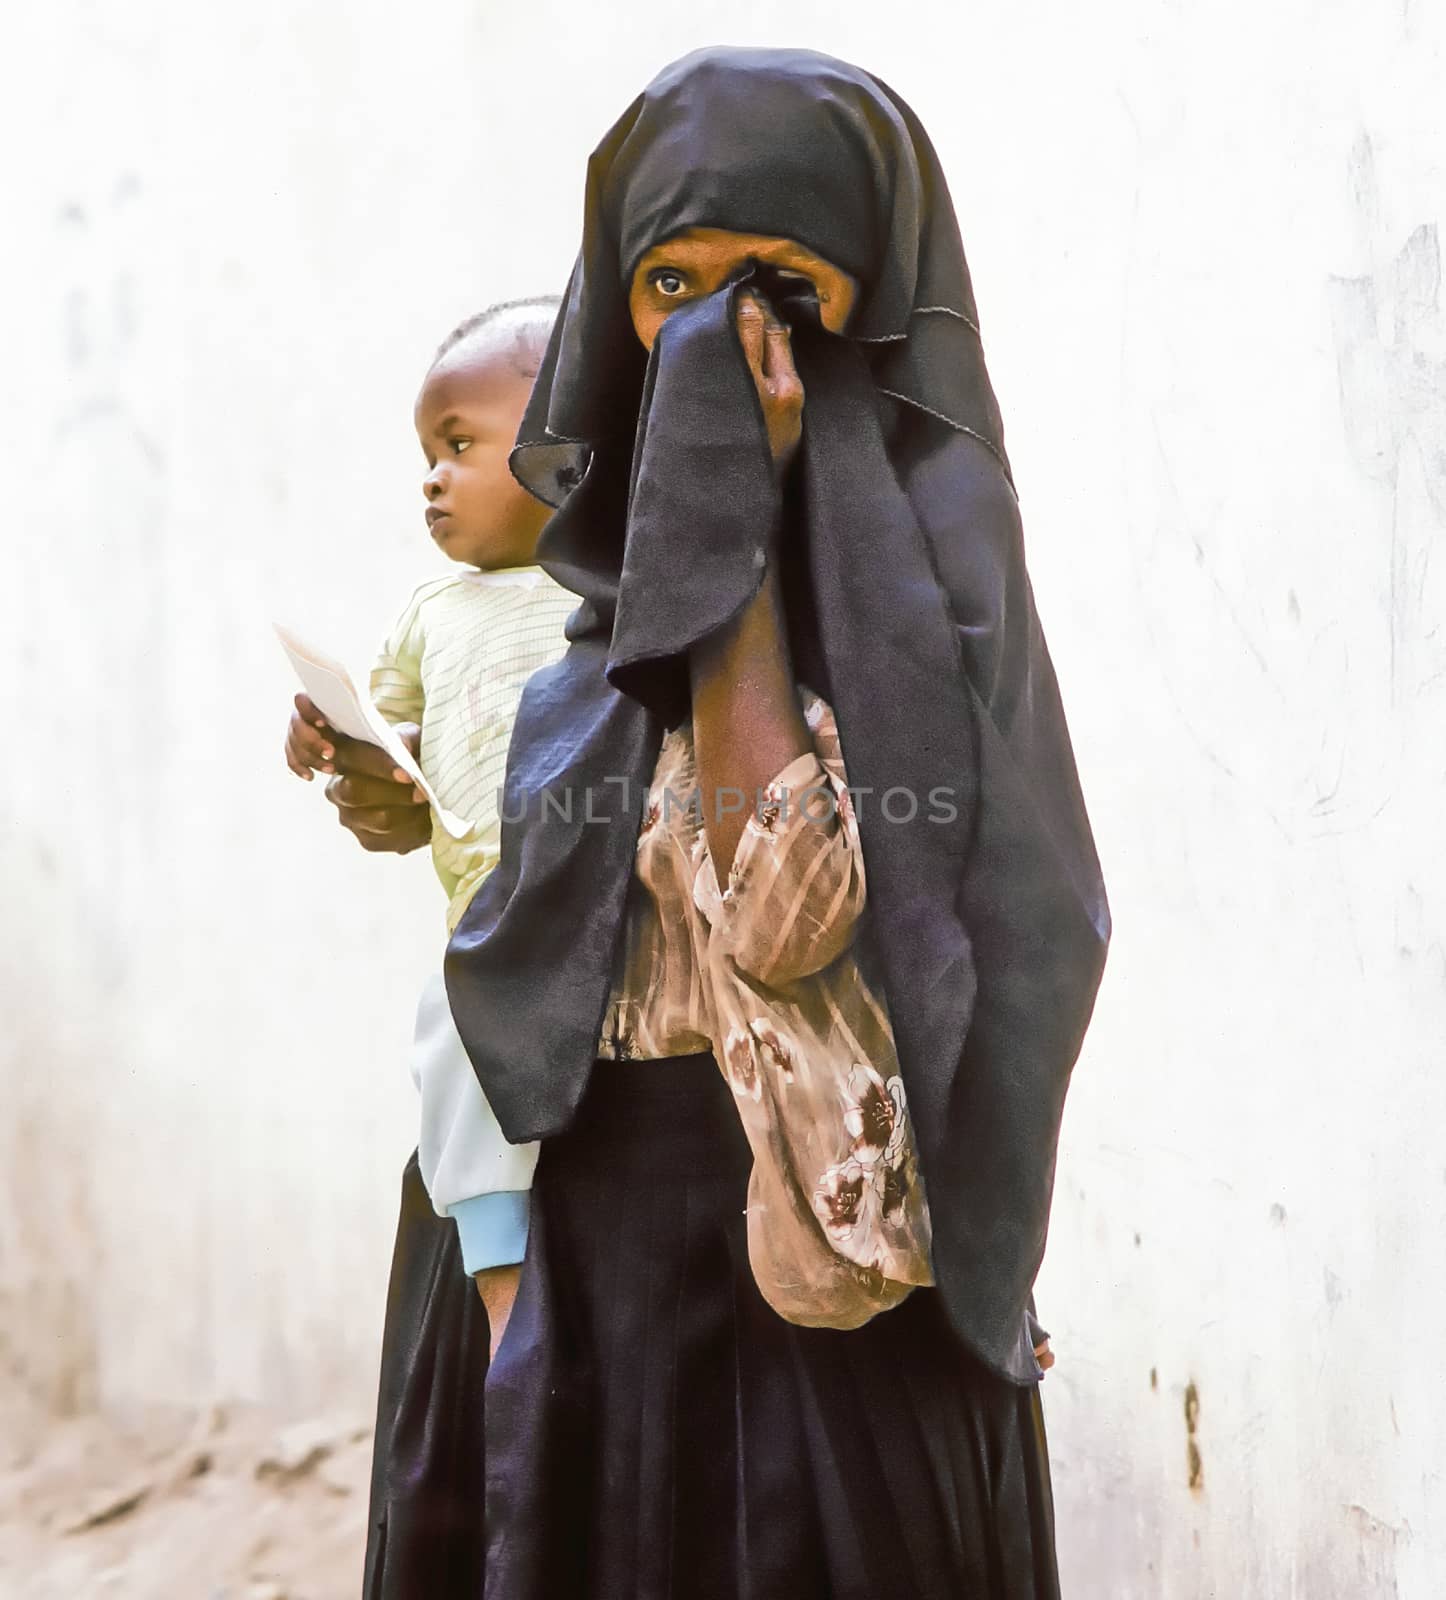 HADHRAMAUT, YEMEN - MAY, 15: arabic unknown mother carries her baby in a  wraparound garment on May 15, 1993 in Hadhramaut, Yemen. in 2008 still 62 percent of women in rural areas are  illiteracy.